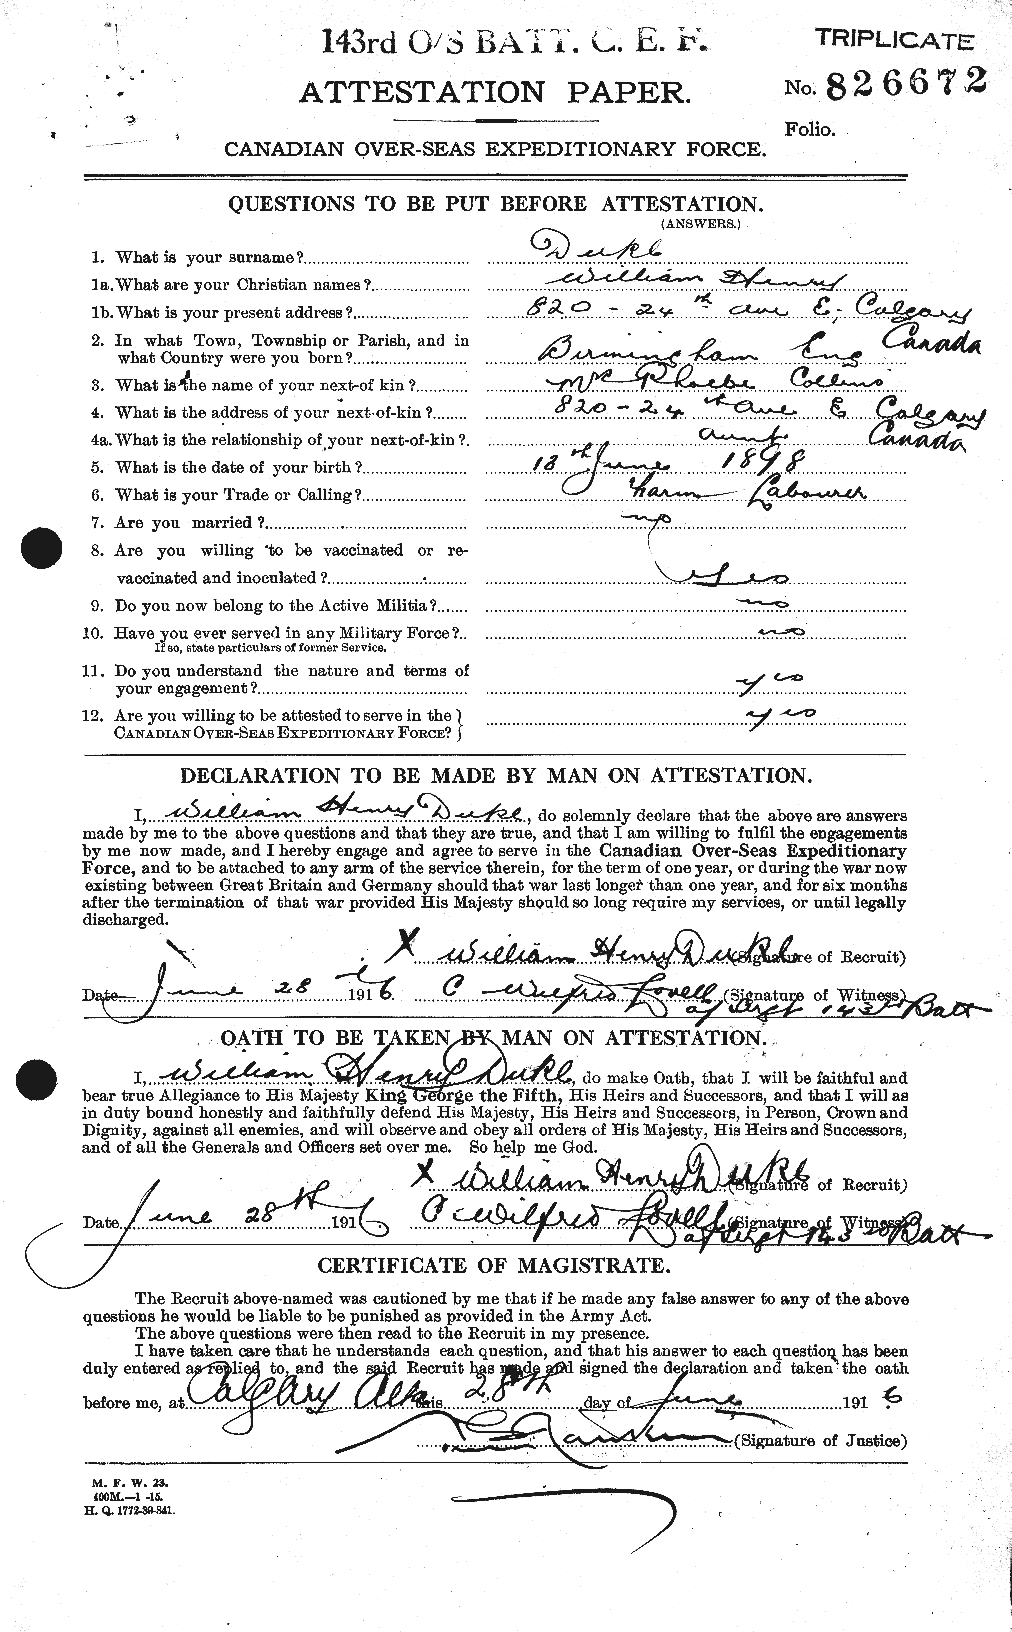 Personnel Records of the First World War - CEF 302065a